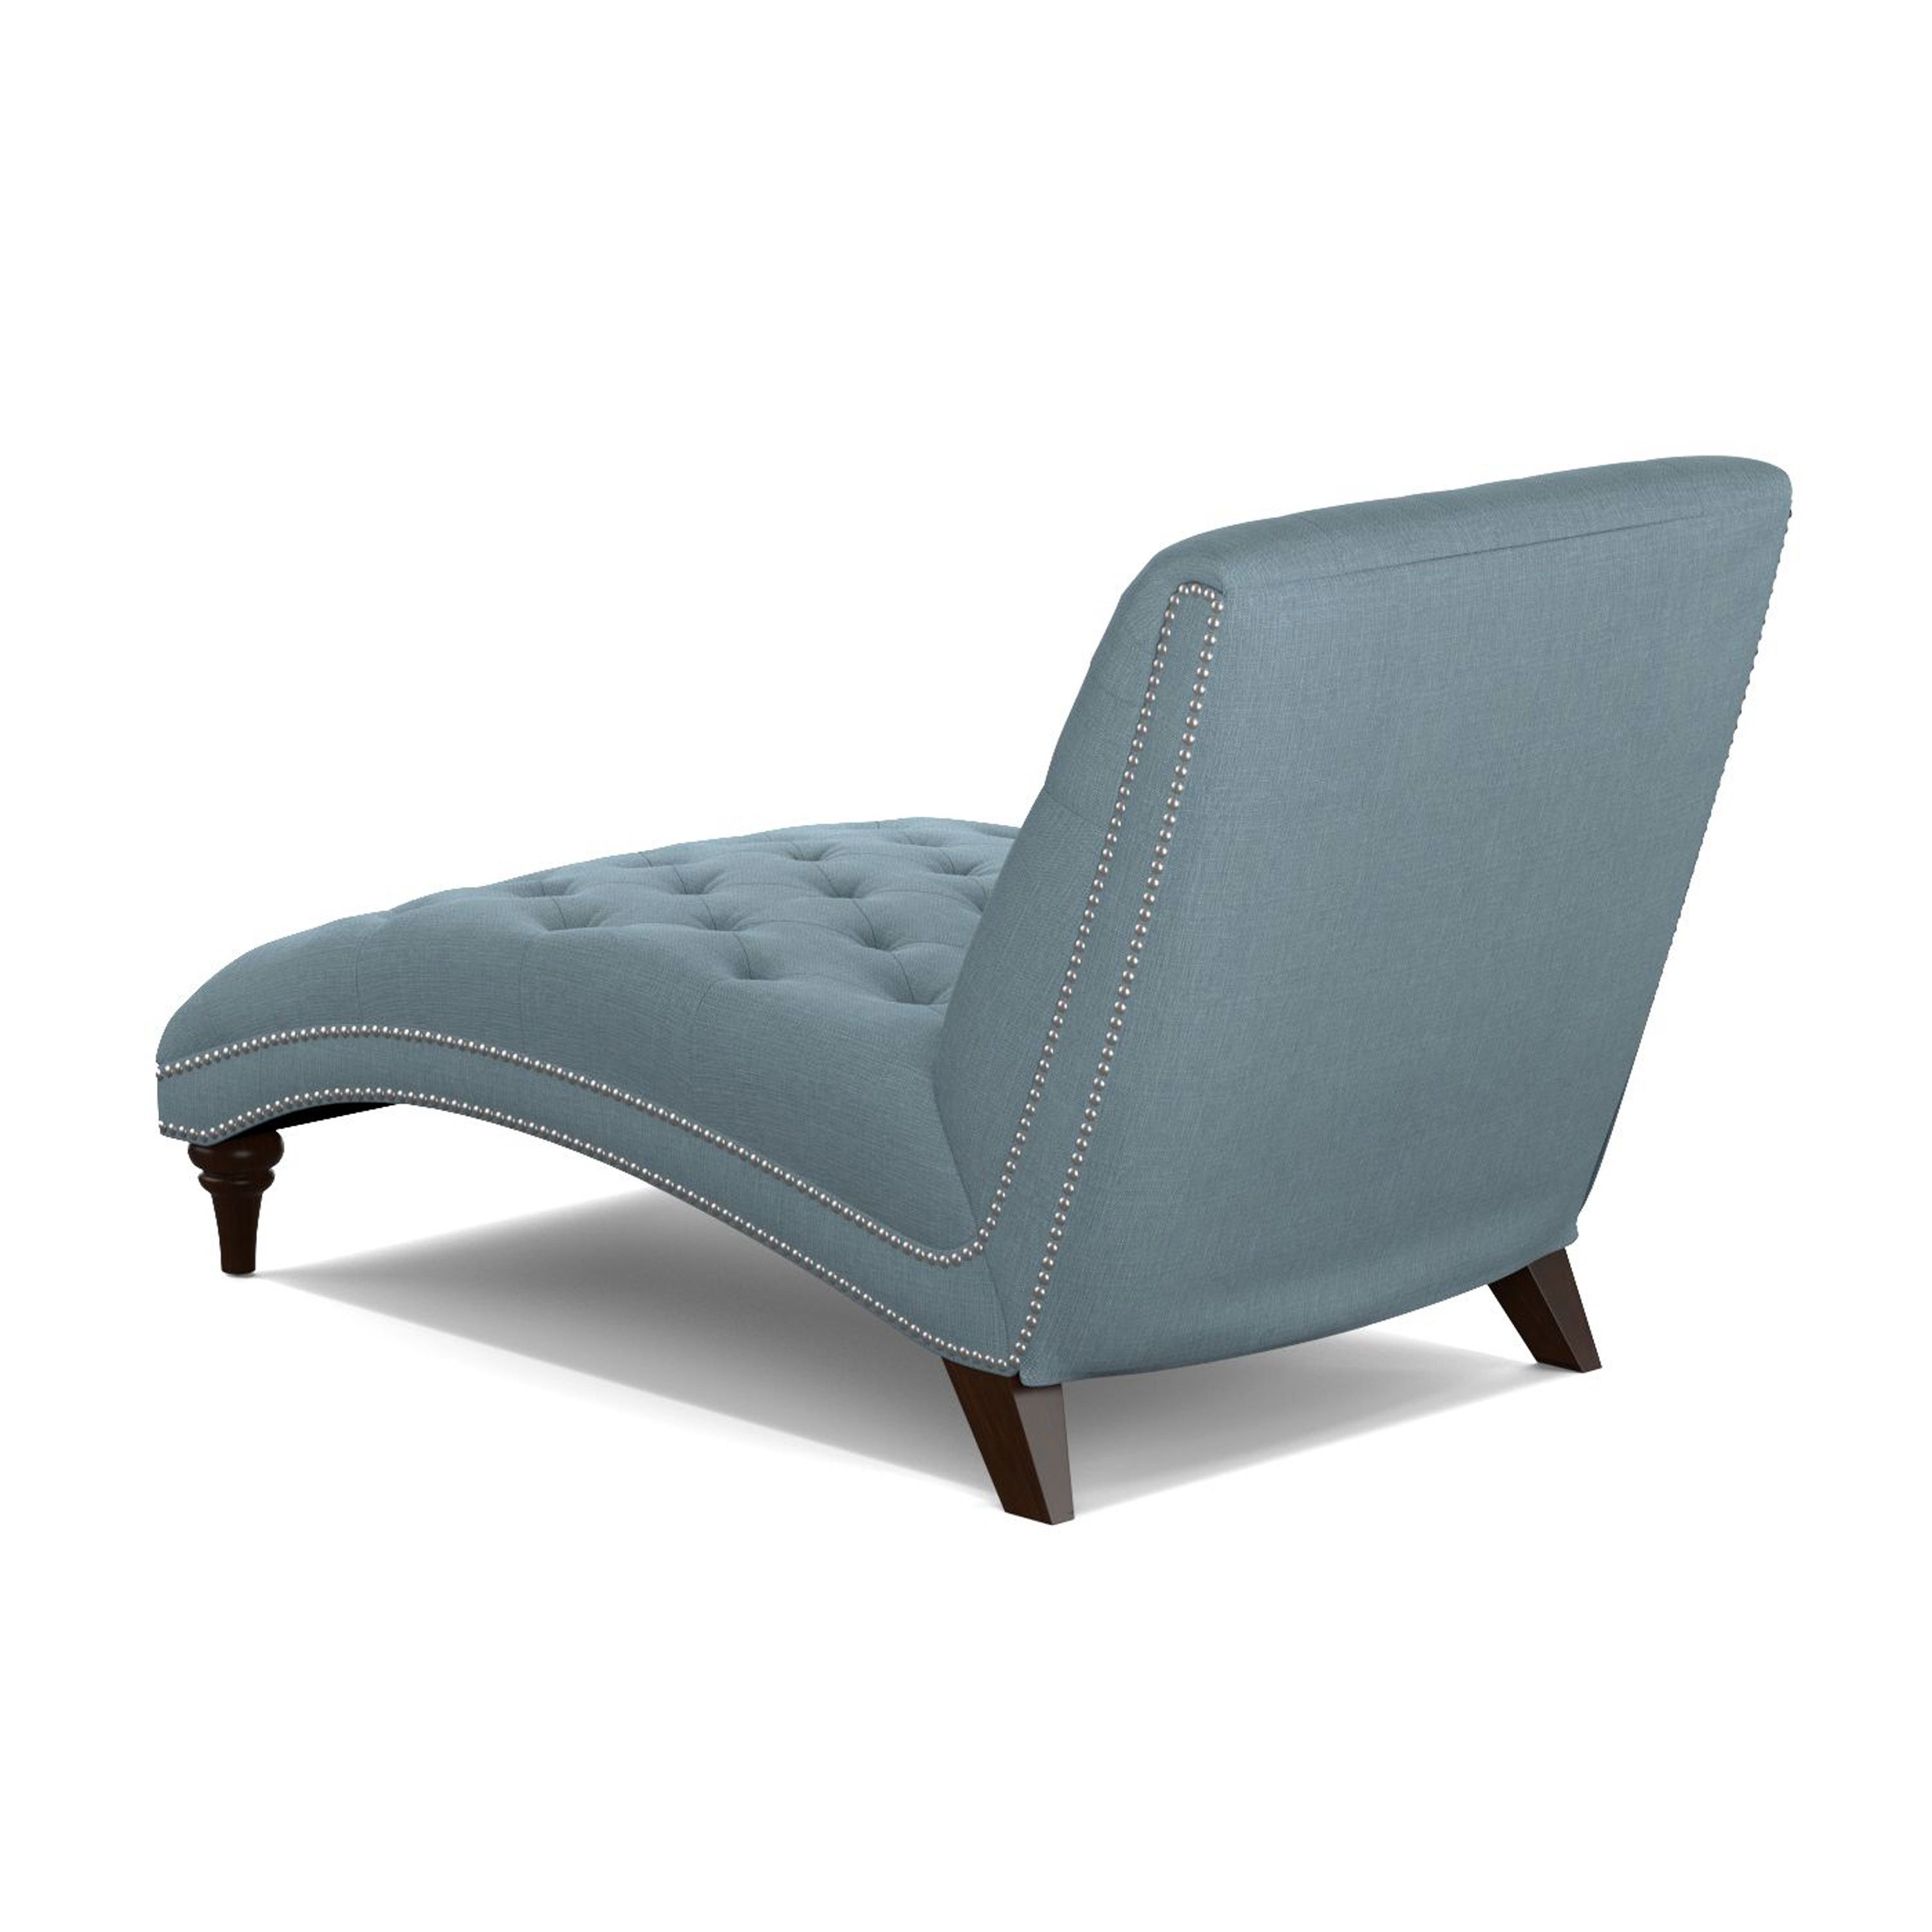 Recent Furniture: Add Traditional Style And Comfort To Any Room With Within Target Chaise Lounges (View 2 of 15)